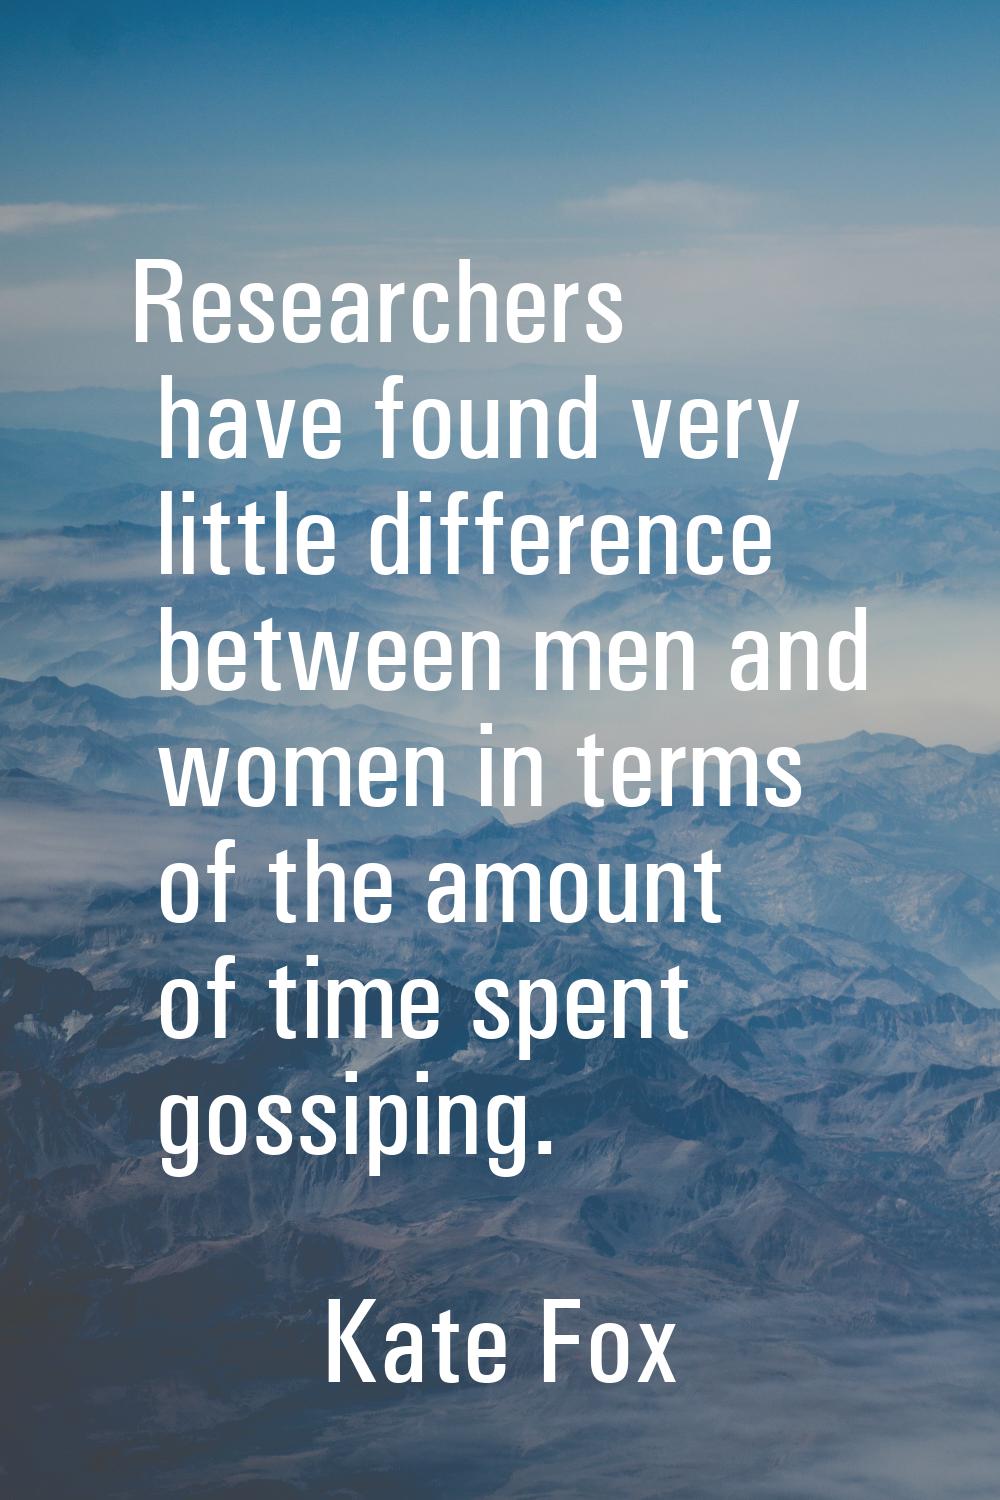 Researchers have found very little difference between men and women in terms of the amount of time 